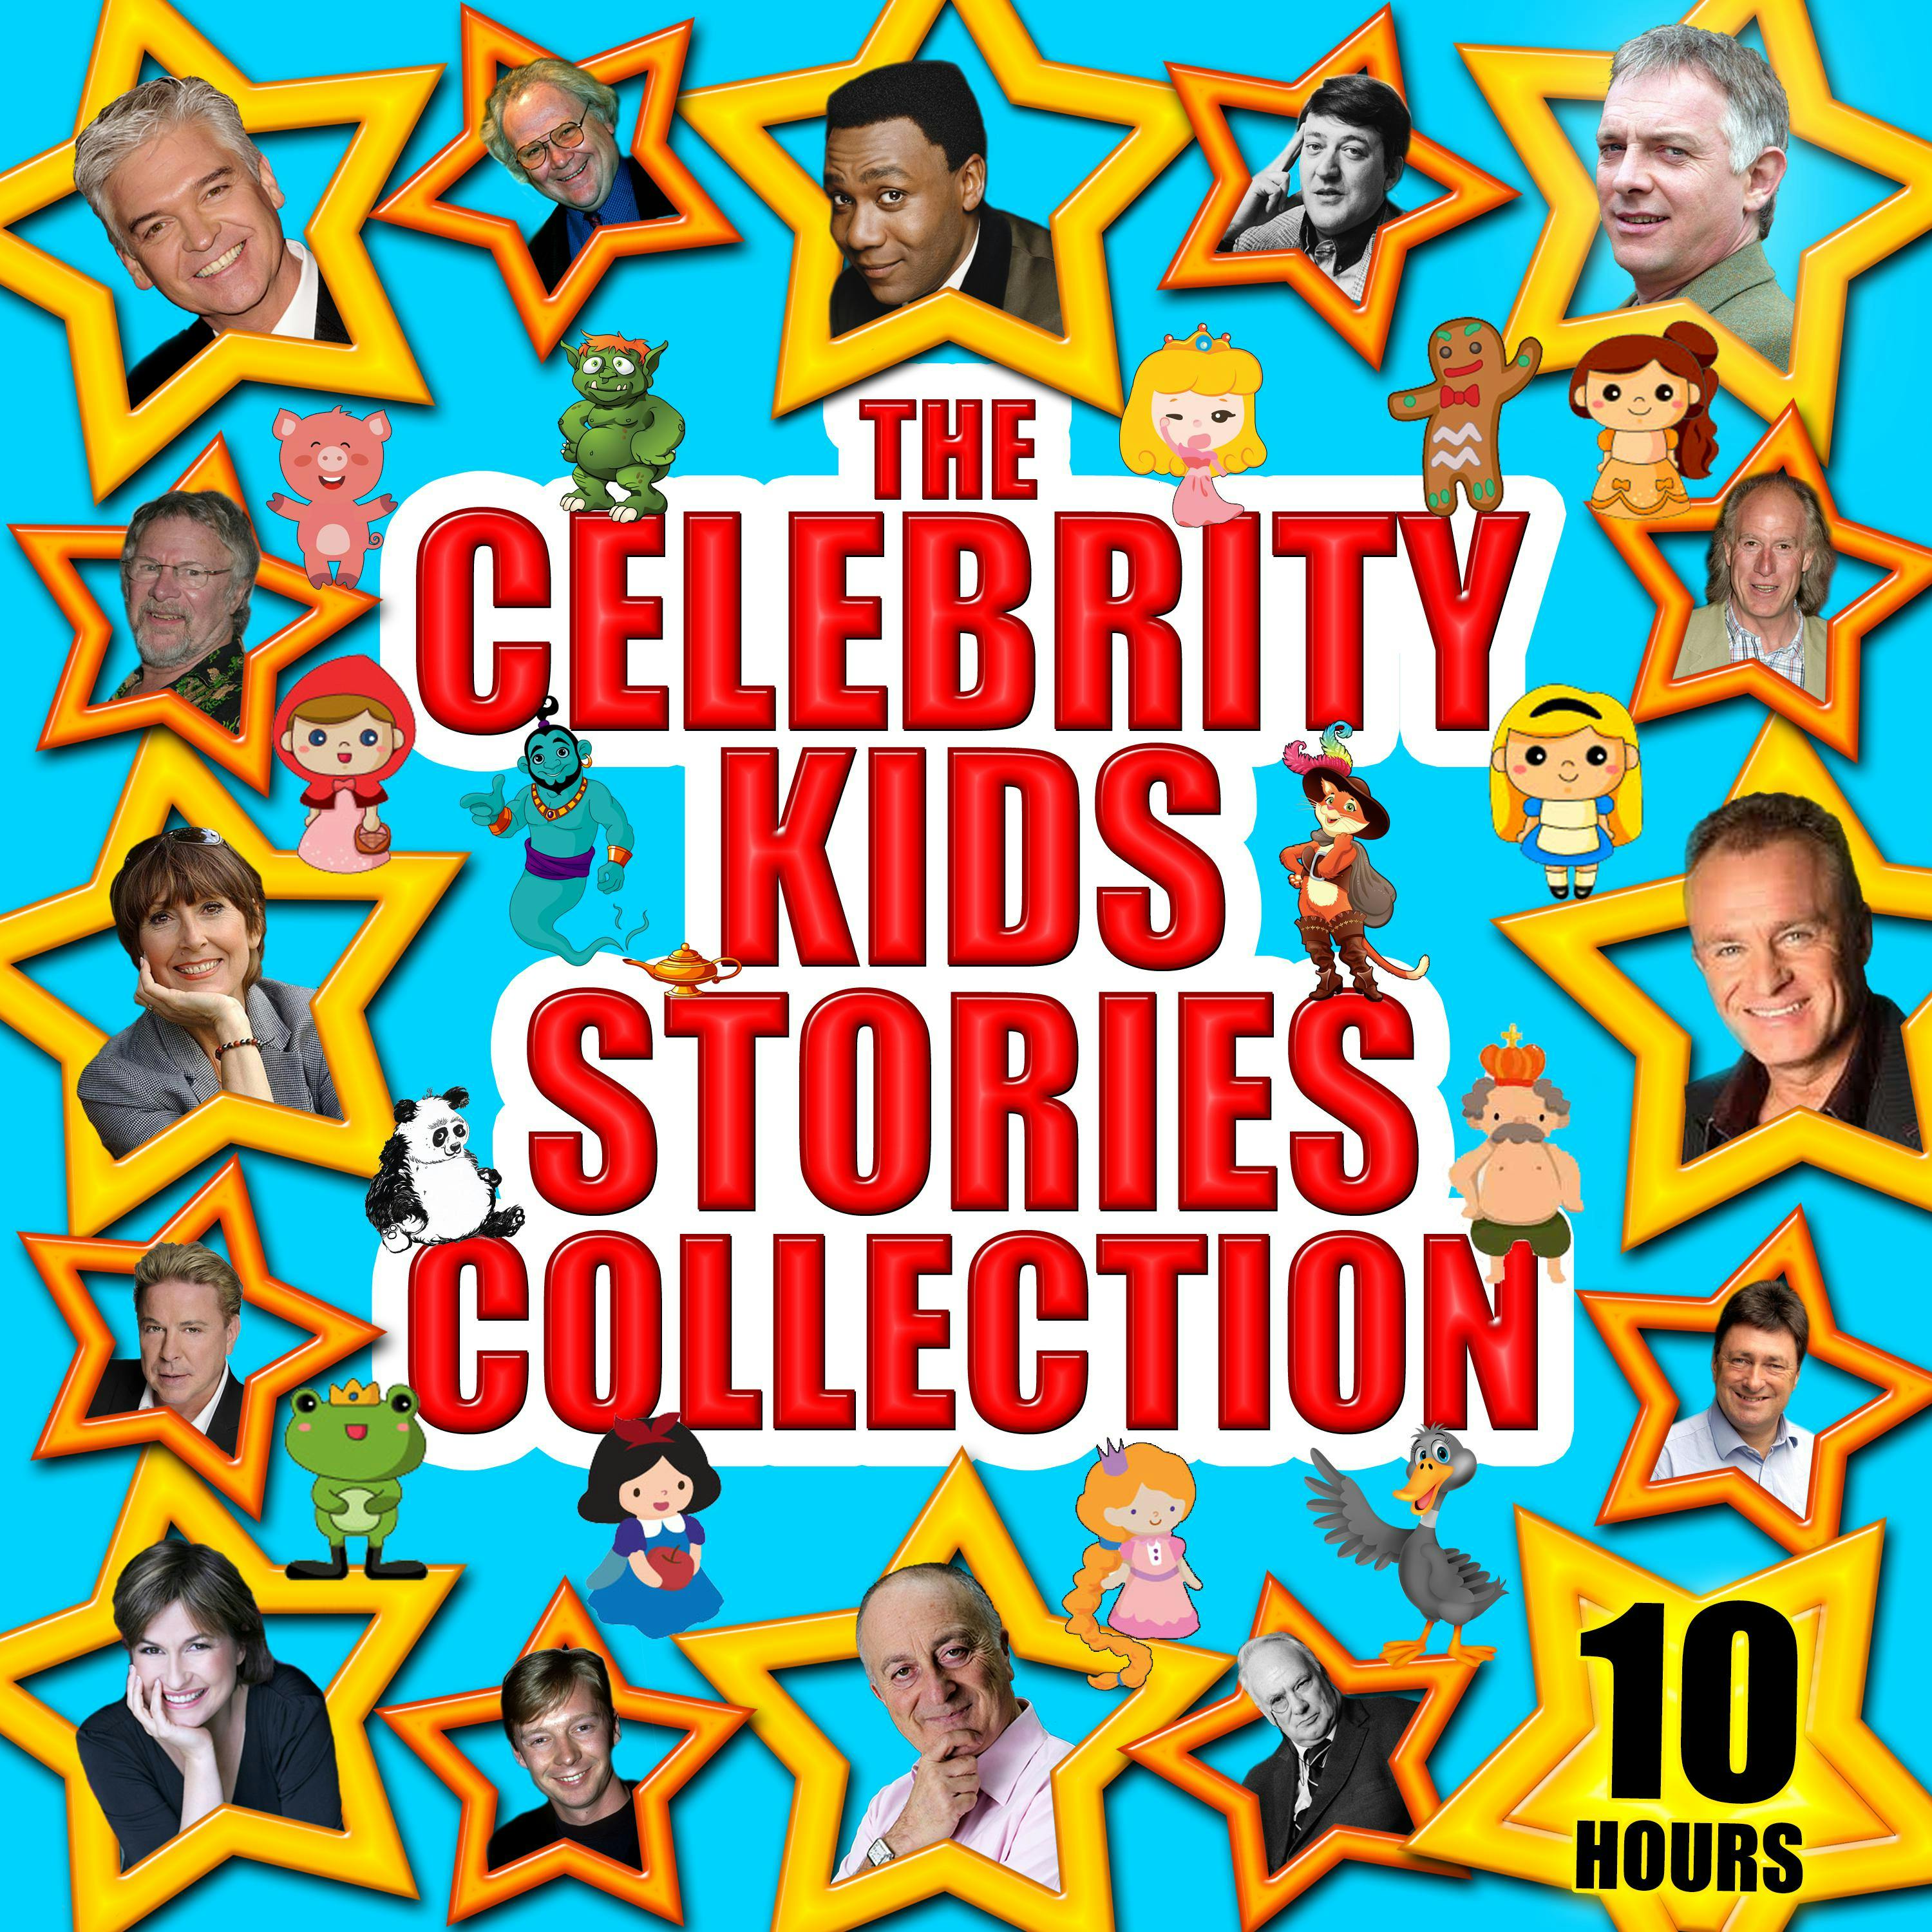 The Celebrity Kids Stories Collection - Hans Christian Andersen, Mike Bennett, Wilhelm Grimm, Tim Firth, Charles Perrault, Jacob Grimm